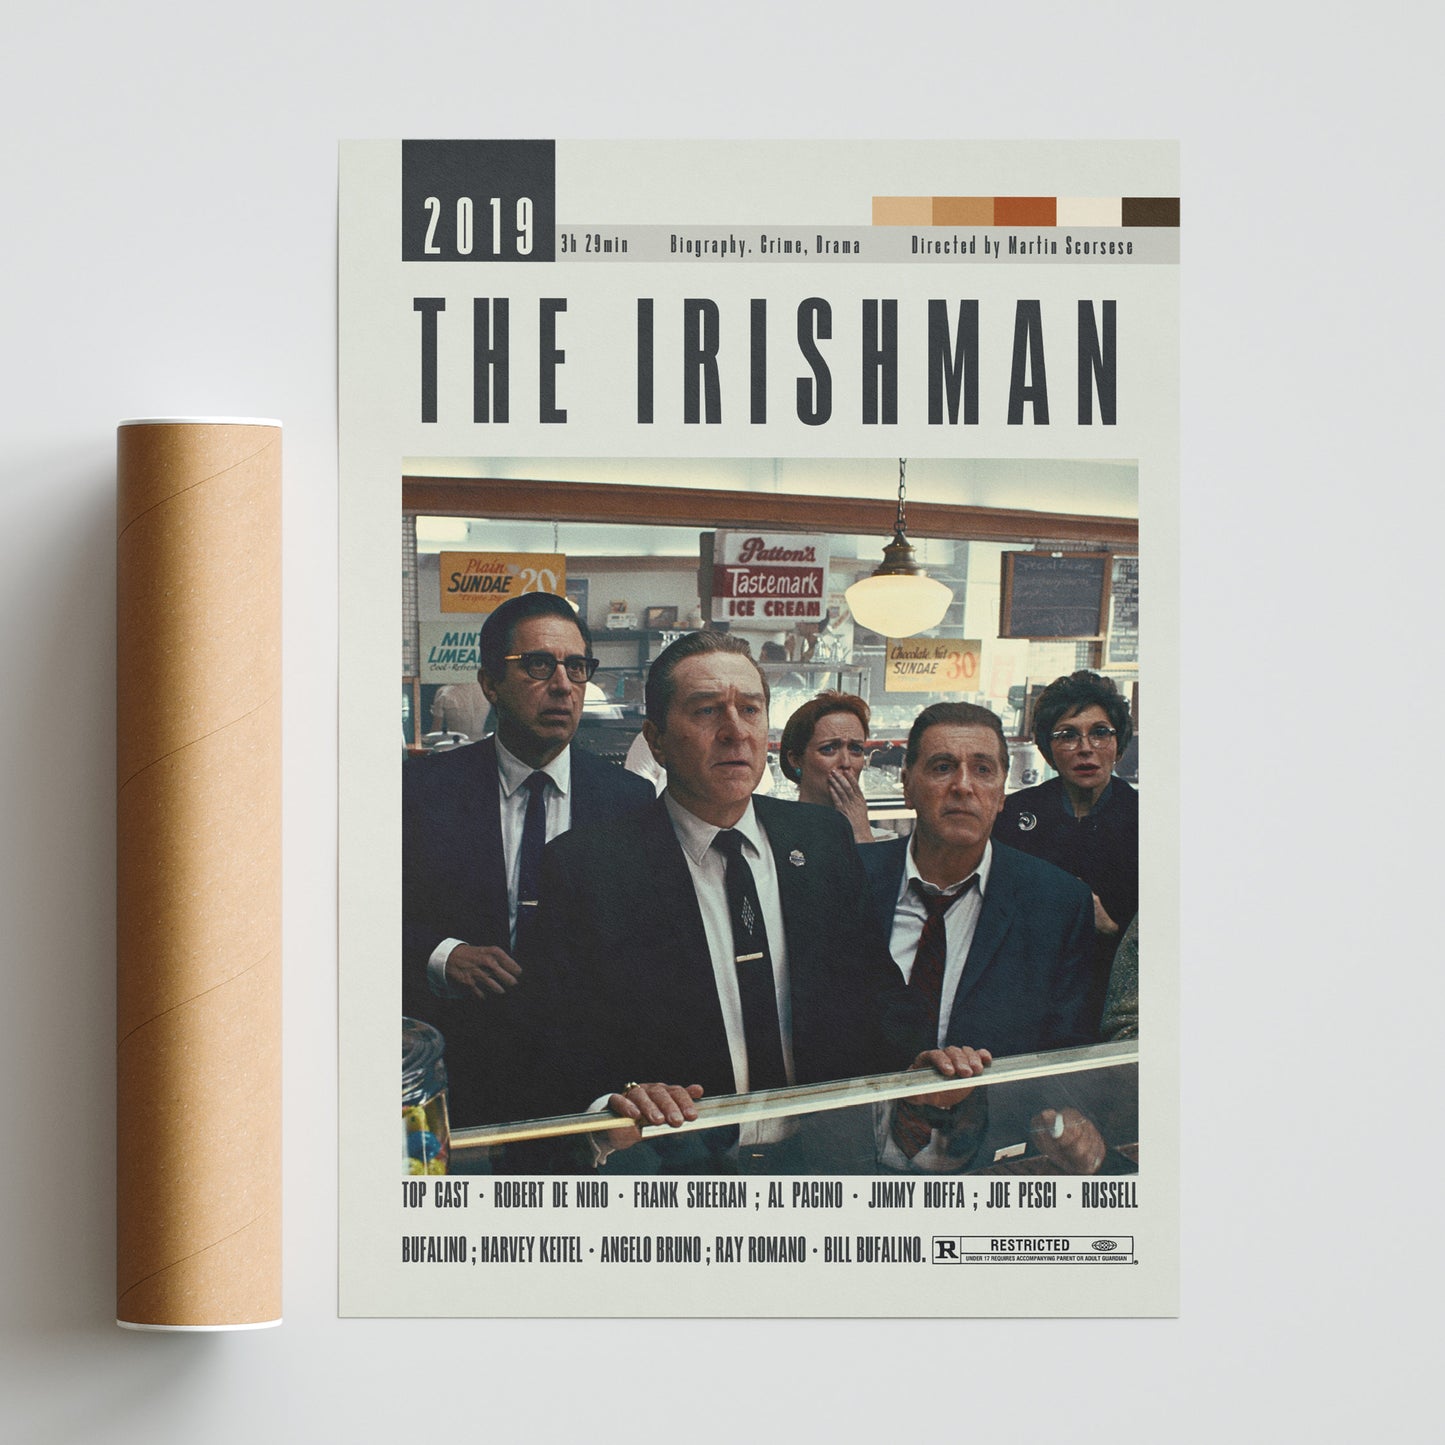 Enhance your movie collection with original movie posters from The Irishman, a masterpiece directed by Martin Scorsese. These posters are available in large sizes, perfect as wall art prints or custom decor pieces. With a vintage and minimalist design, these posters will add a touch of retro charm to your home.